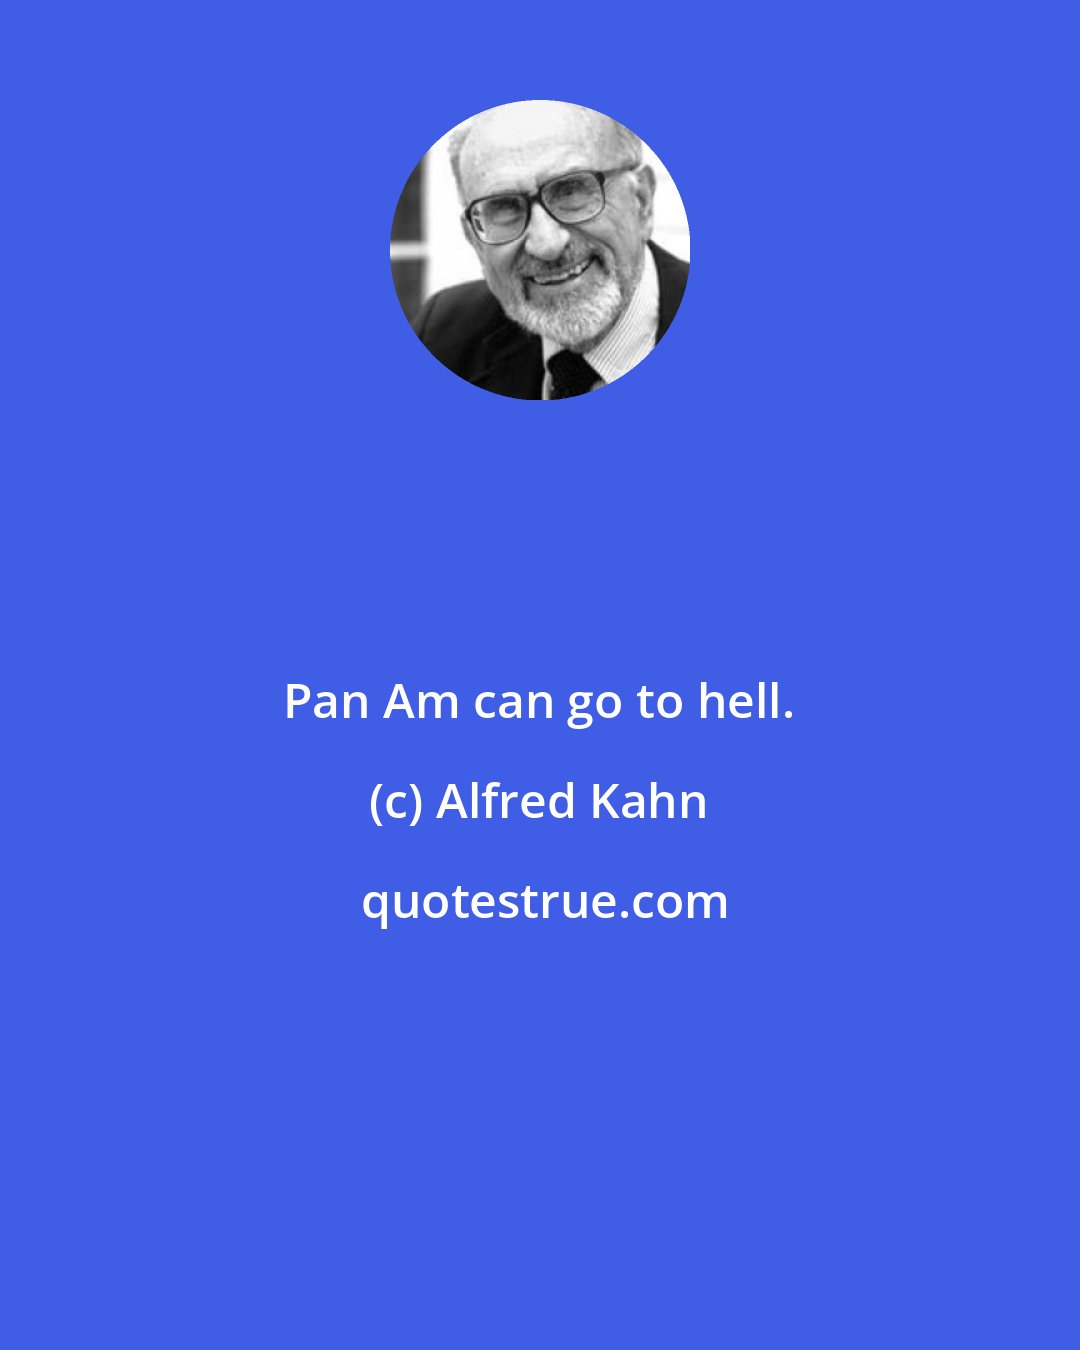 Alfred Kahn: Pan Am can go to hell.